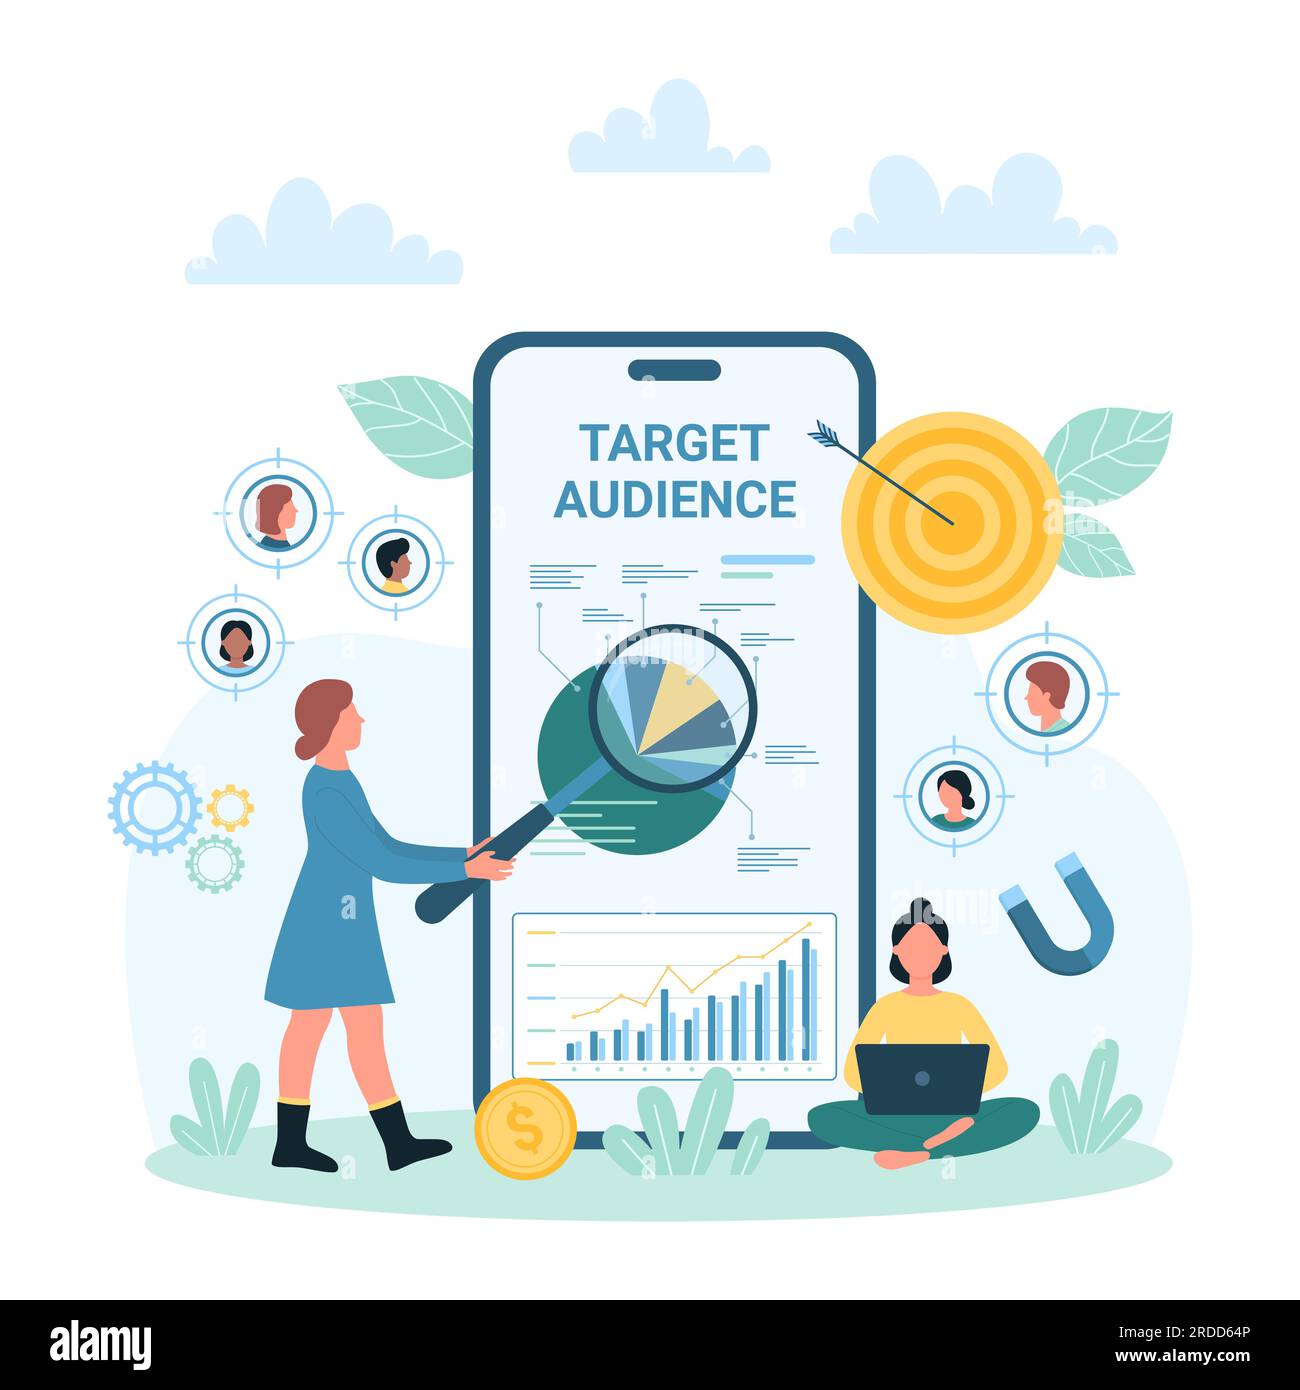 Target audience research vector illustration. Cartoon tiny people with magnifying glass consulting about customers outreach and focus group, digital targeting service in smartphone mobile app Stock Vector